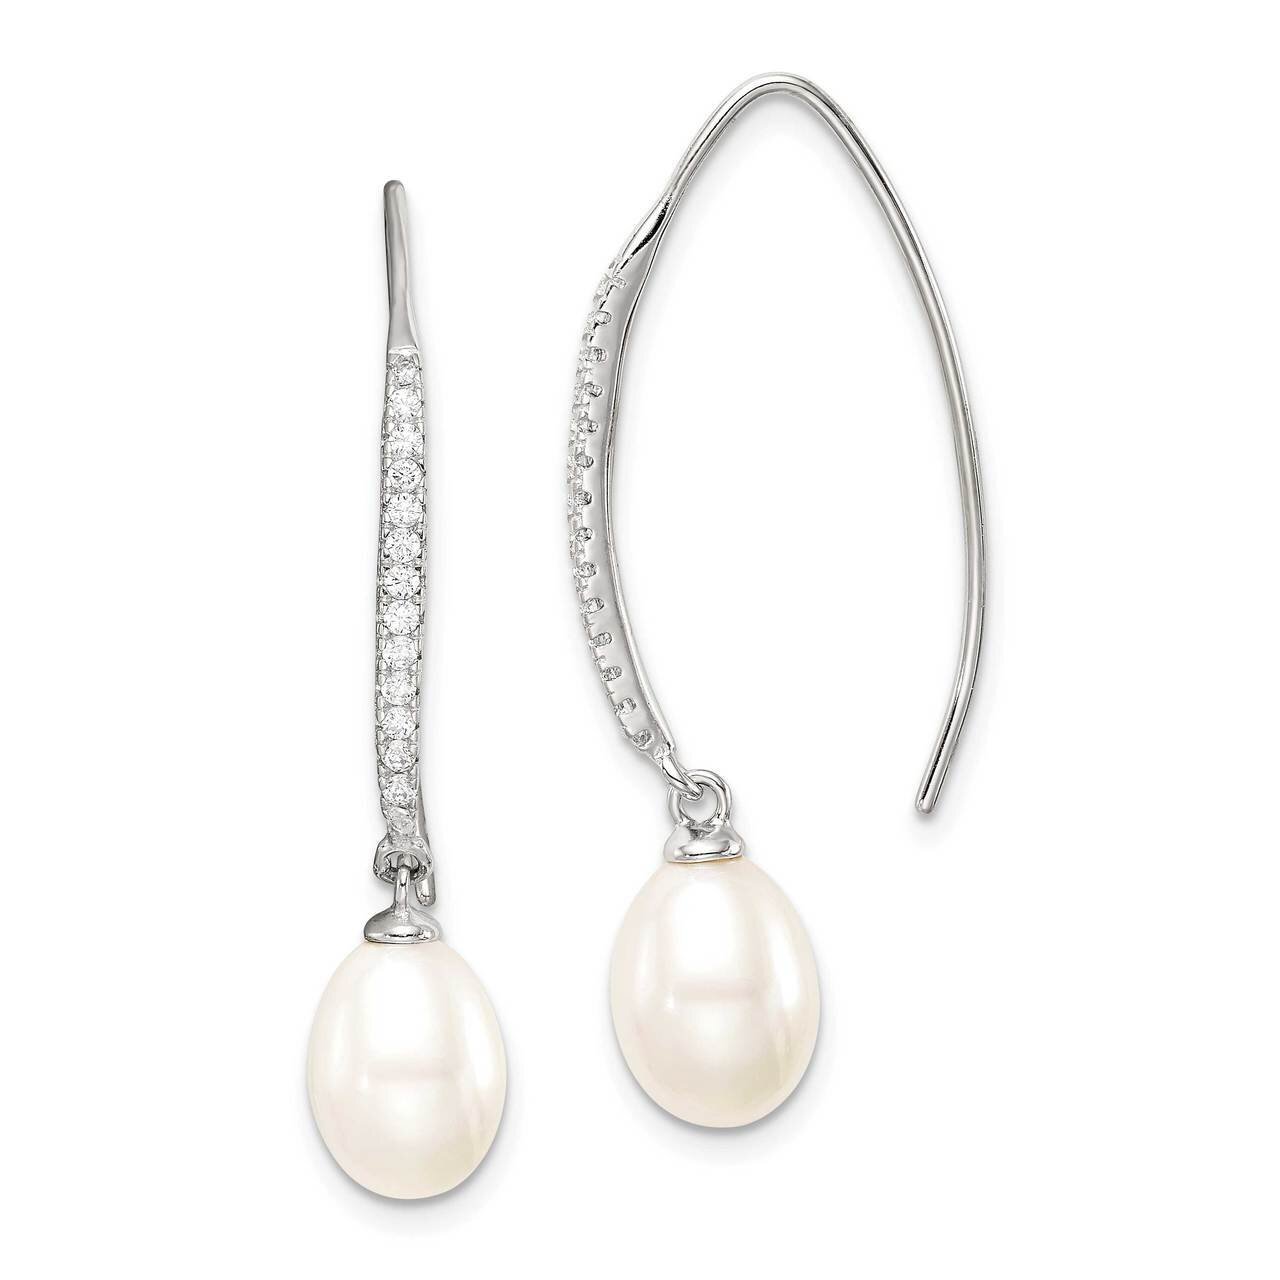 7-8mm White Rice Freshwater Cultured Pearl CZ Diamond Threader Earrings Sterling Silver Rhodium-plated QE15366